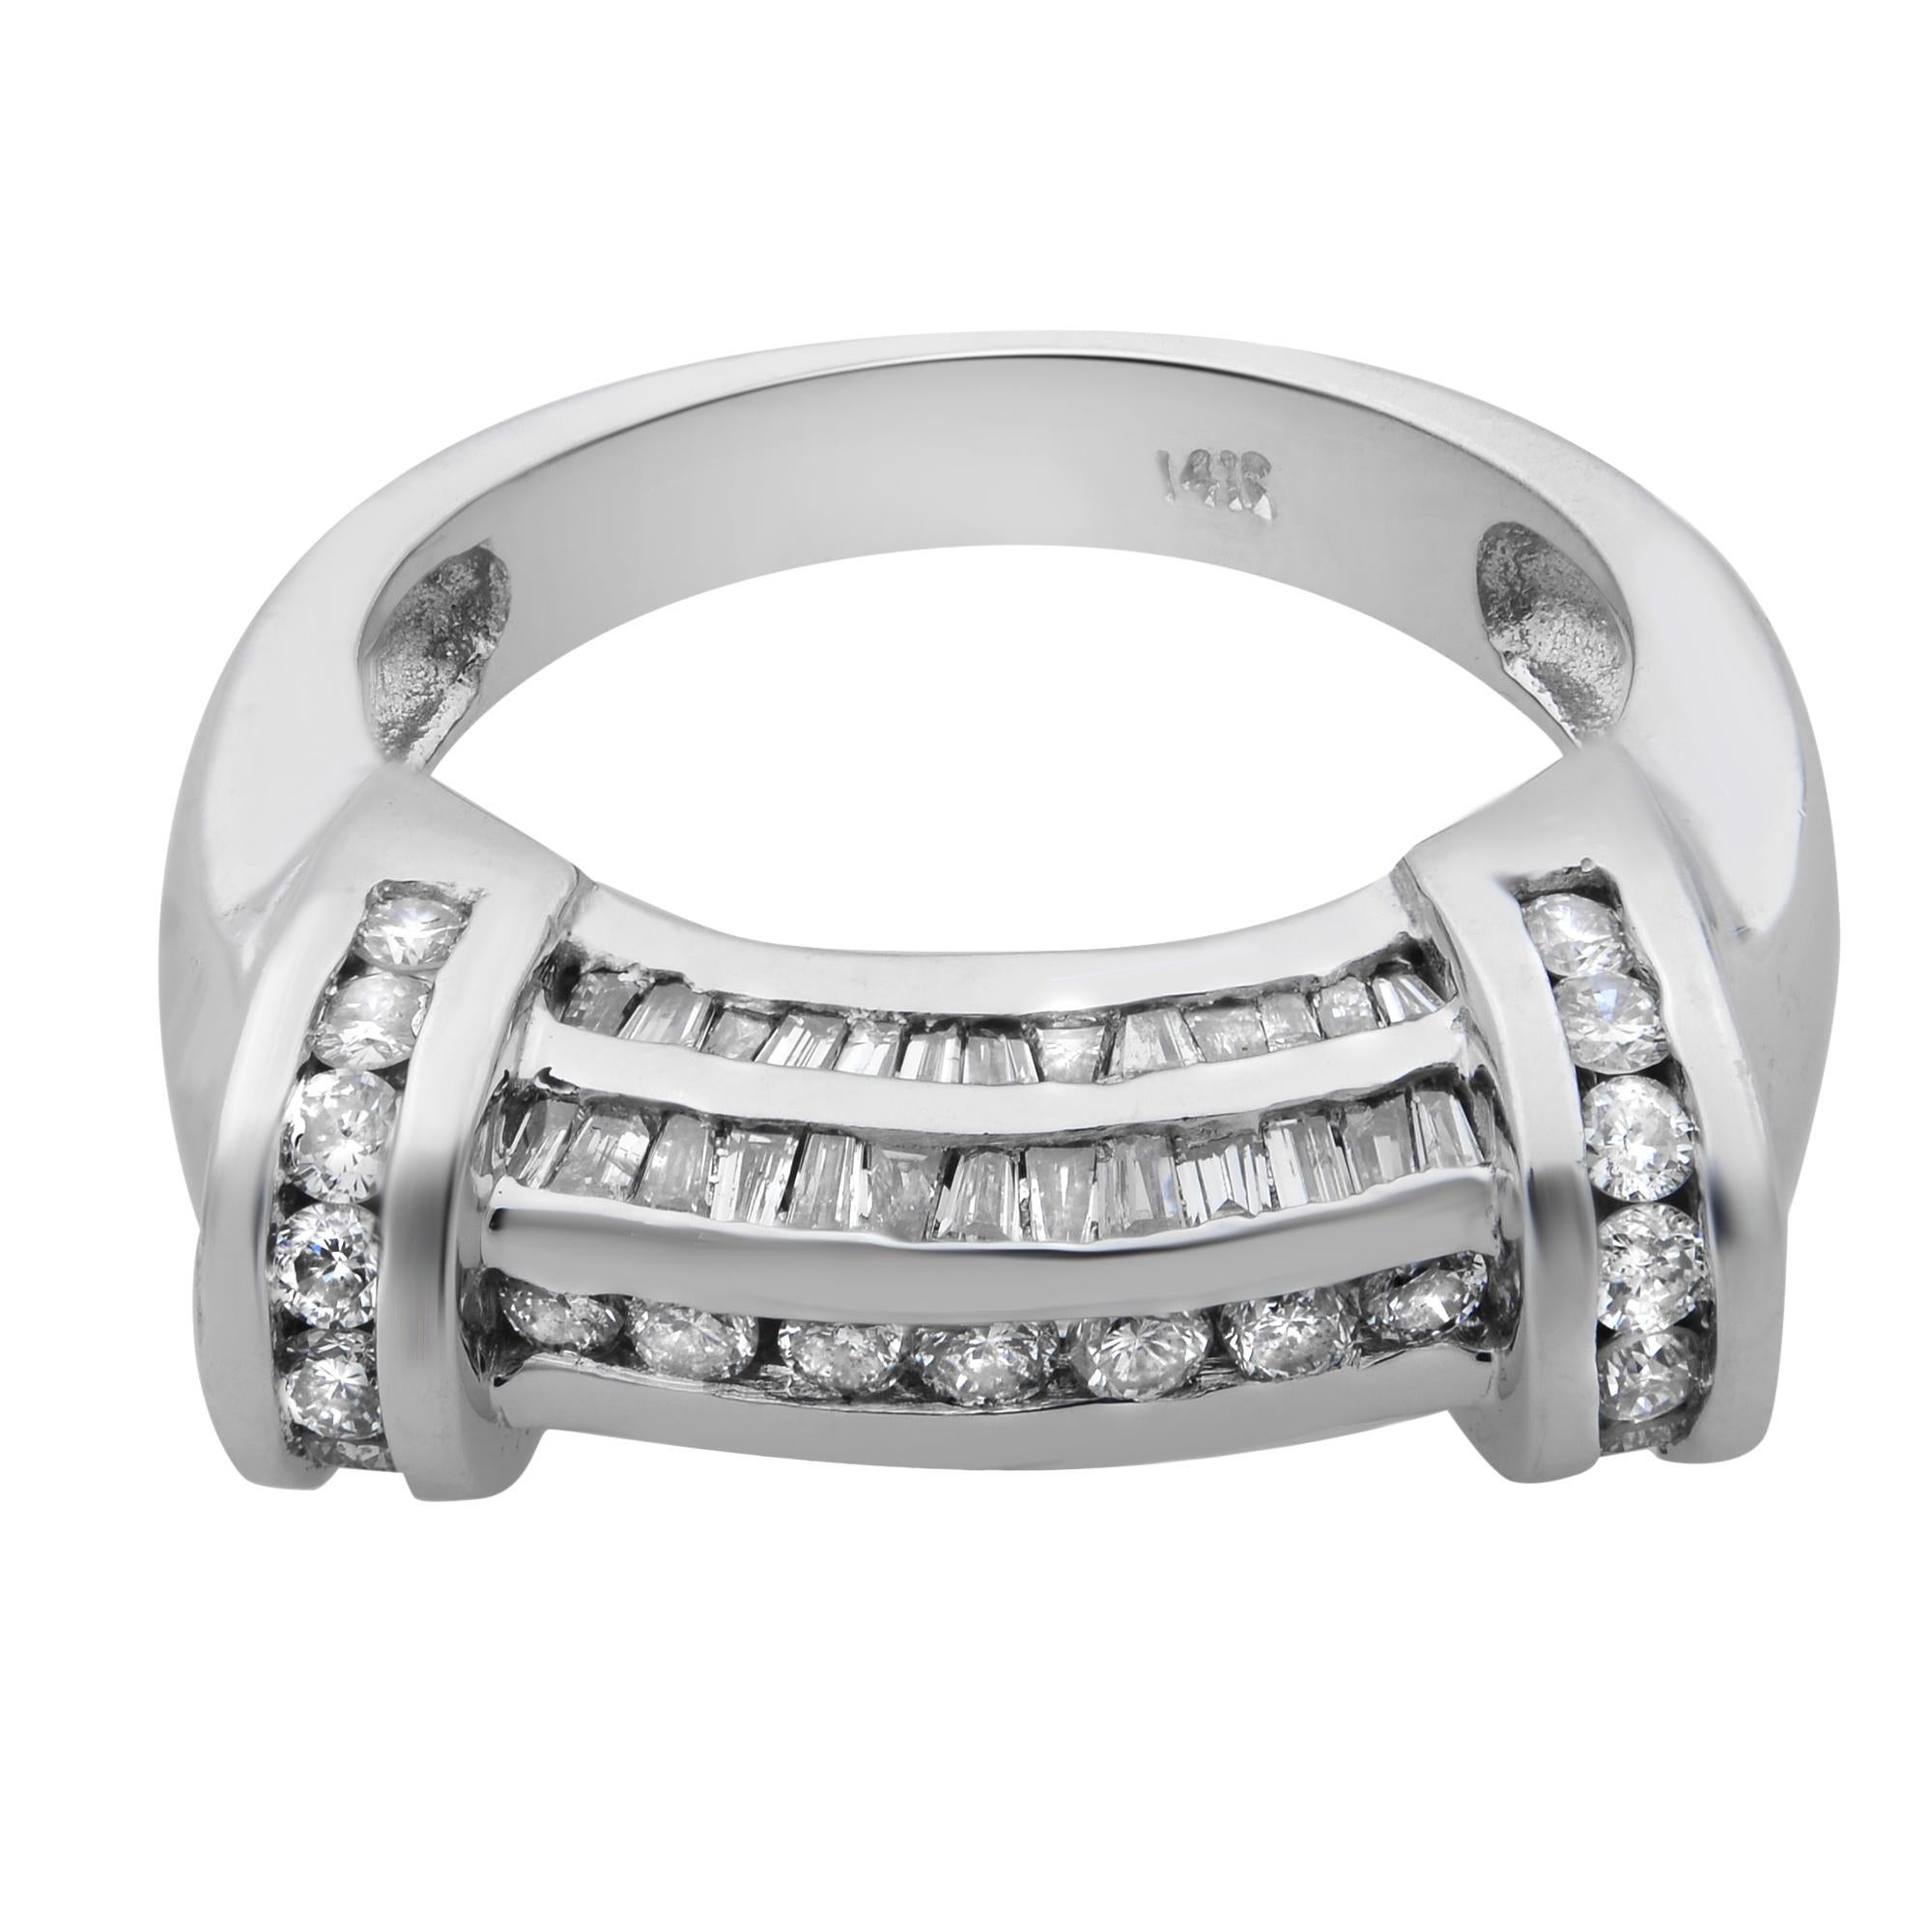 Speak of the bold and beautiful design of this 14k white gold diamond ring band. It features baguette and round brilliant cut diamonds encrusted in channel setting. Total diamond weight: 1.00 carat. Diamond quality: J-K color and I clarity. Ring